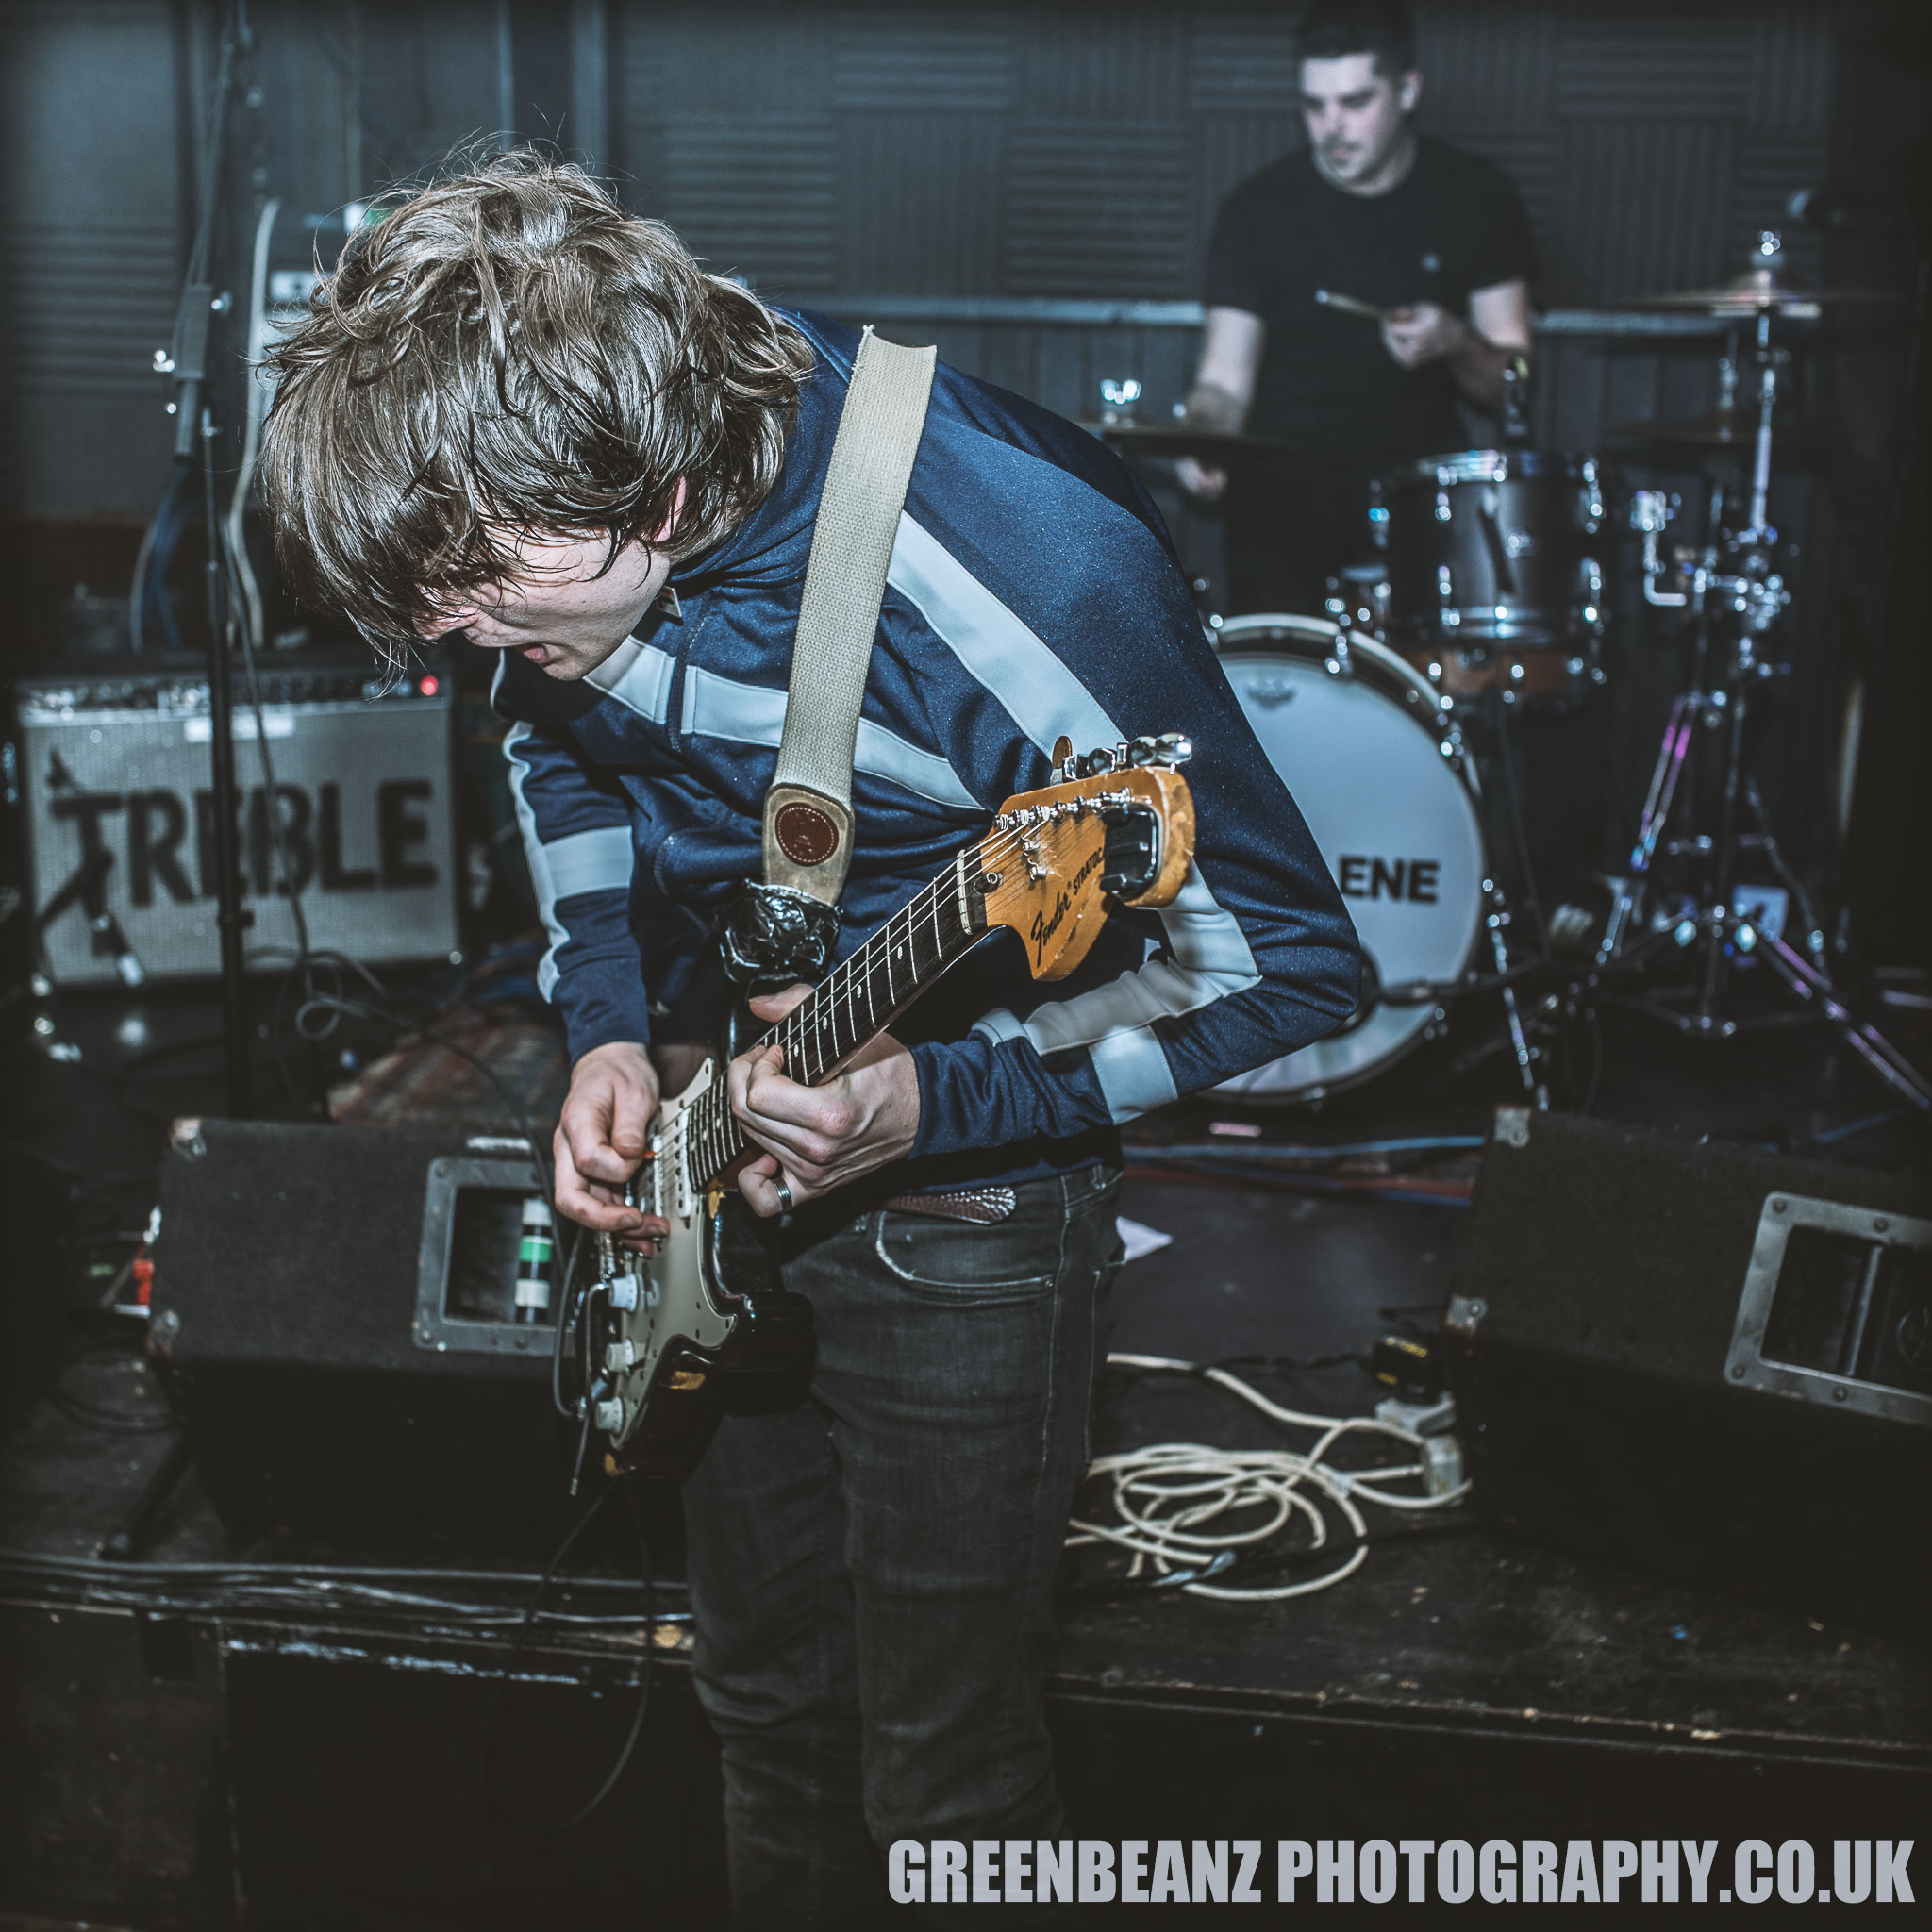 Jack Jones of Trampolene shreds in nice threads at The Junction Plymouth